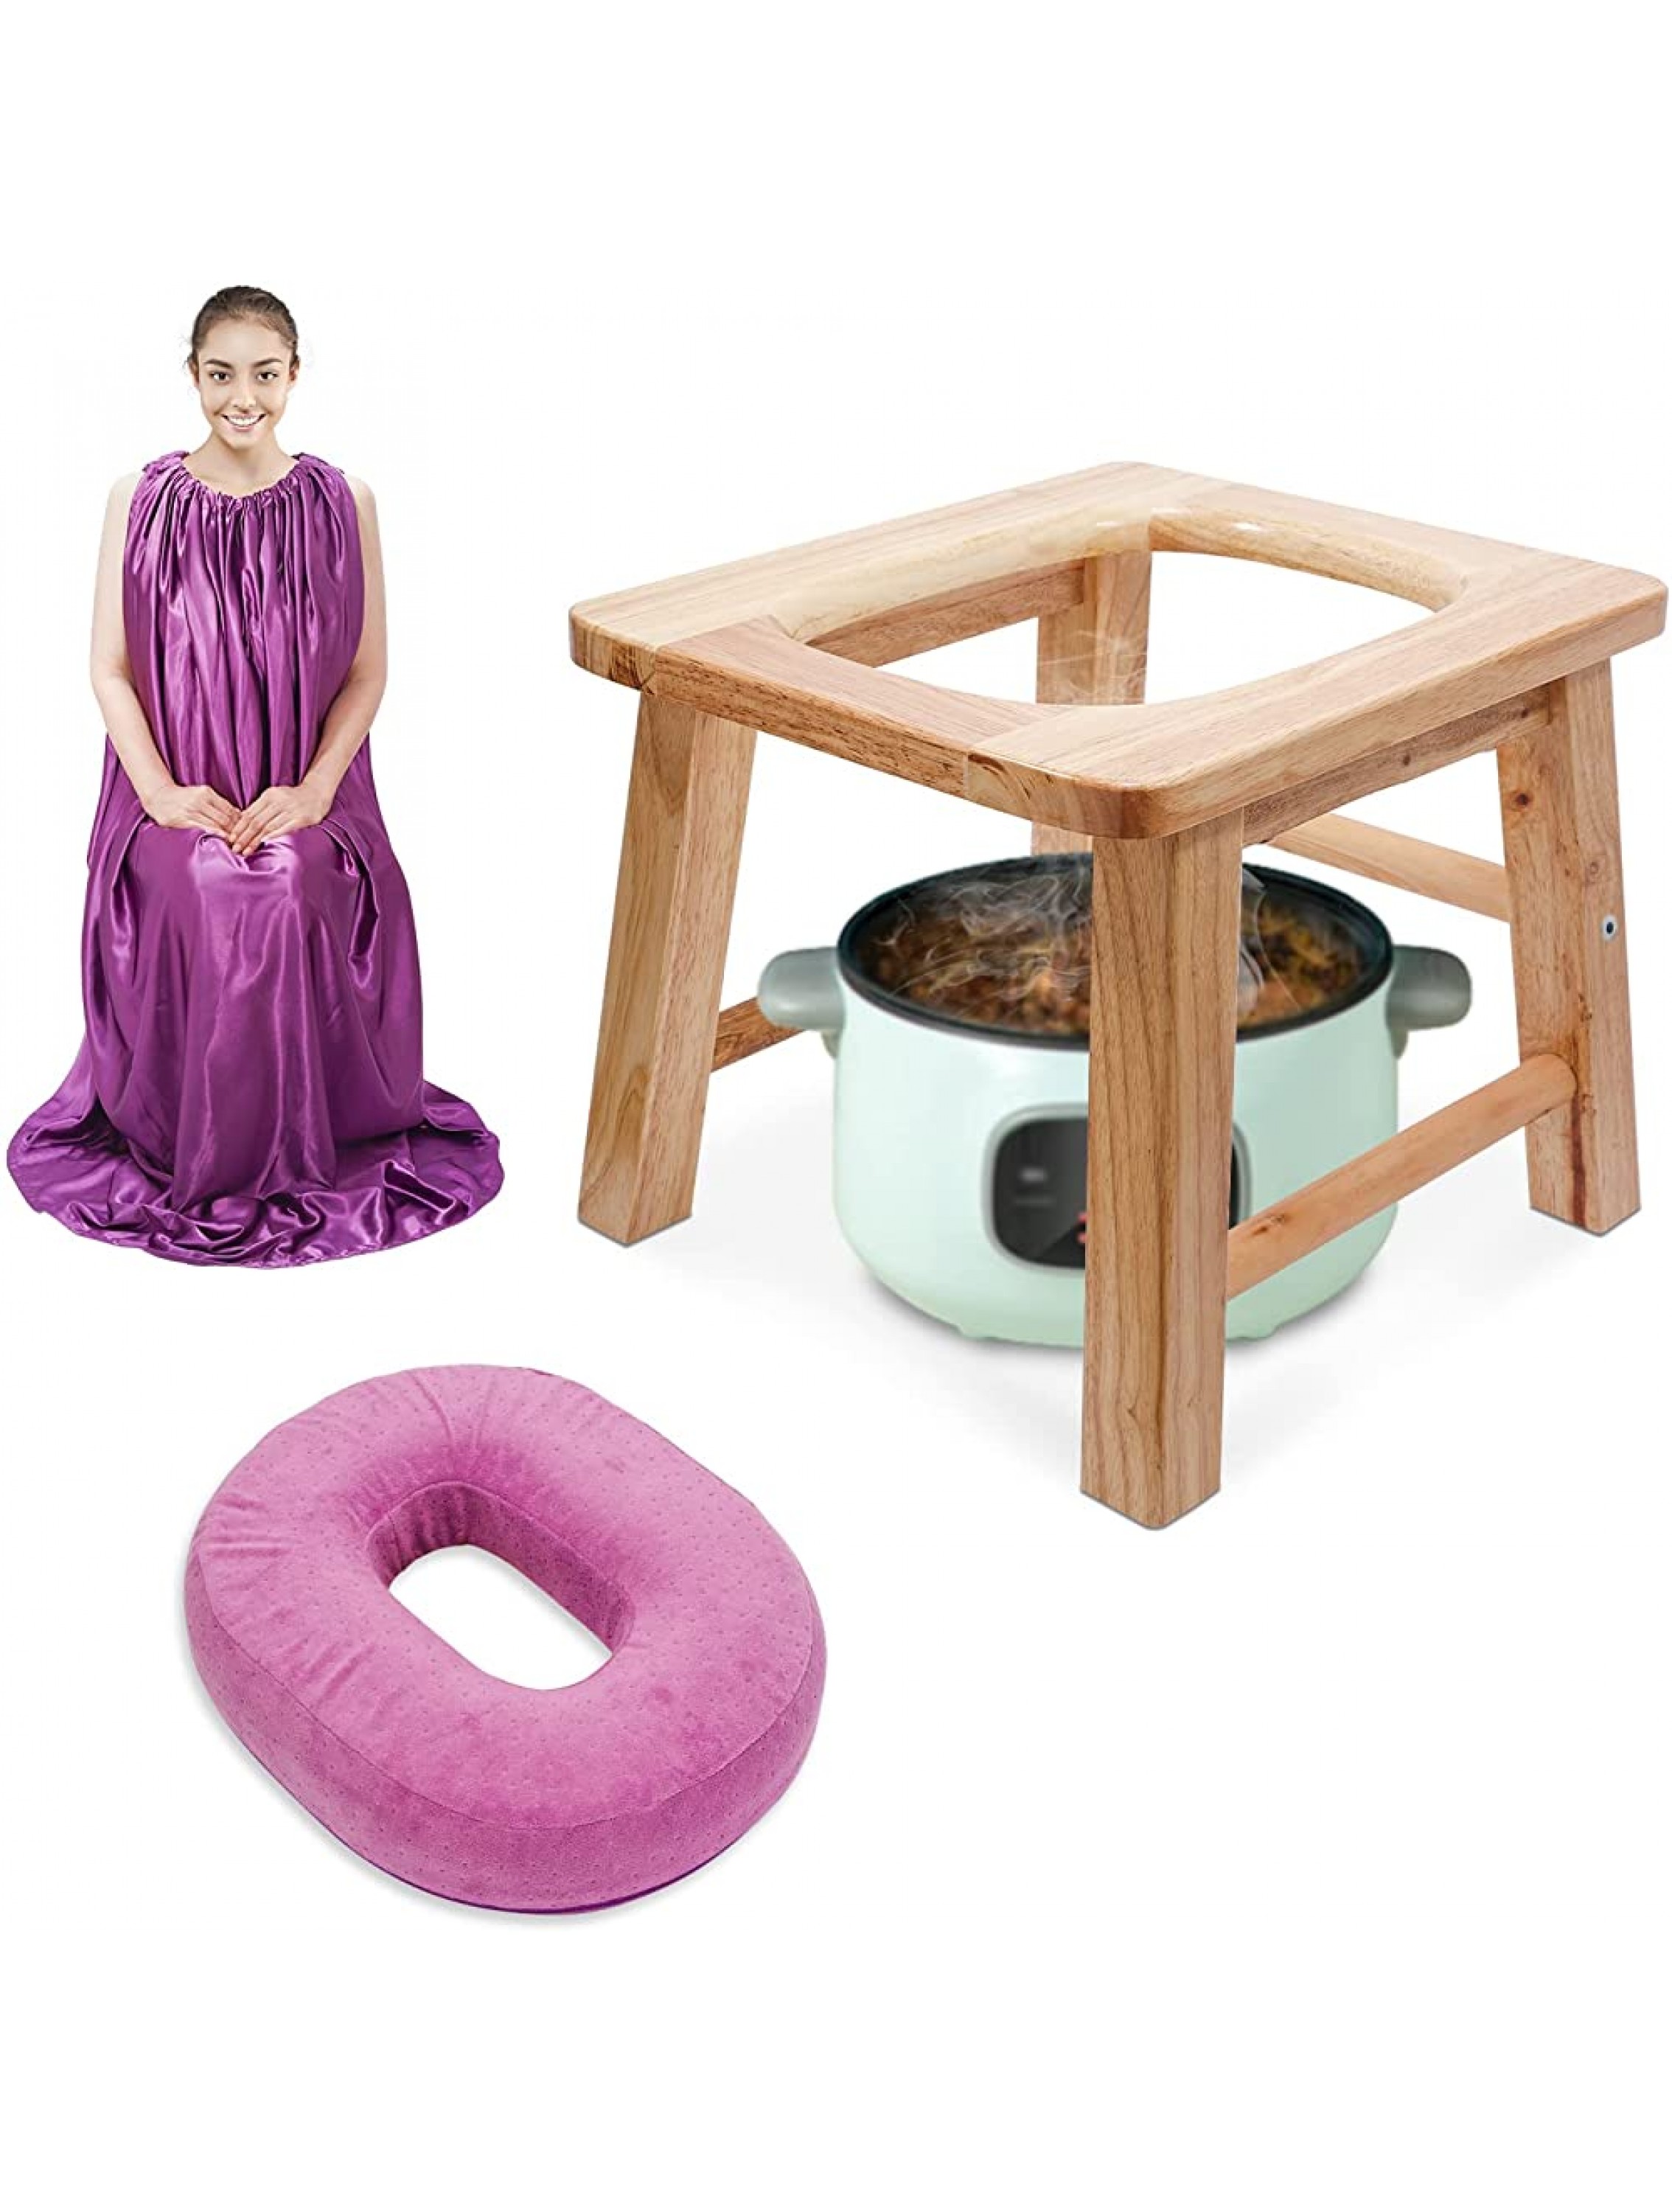 Yoni Steam Seat Wood Set,Yoni Steam Kit Yoni Steamer Chair Wood Vaginial Steaming Seat Kit with Gown & Thick Cushion for All Women Cleansing,Tightening,Feminine Vaginal Postpartum CareNo Steamer - BJAG6MX2Q